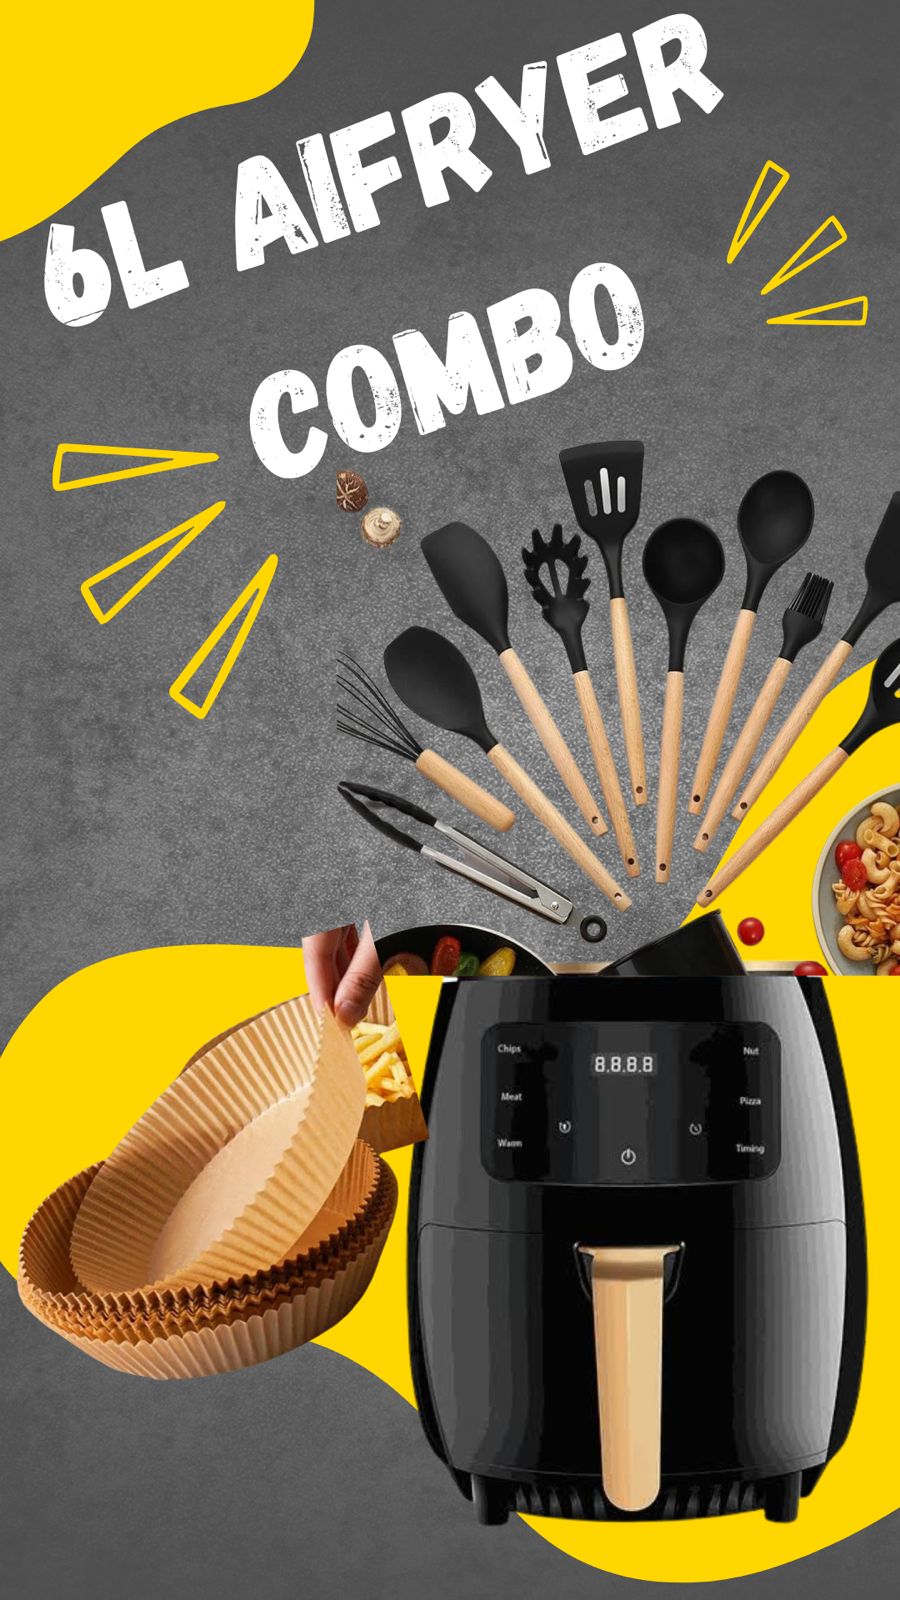 6 Litre Airfryer Kitchen Combo